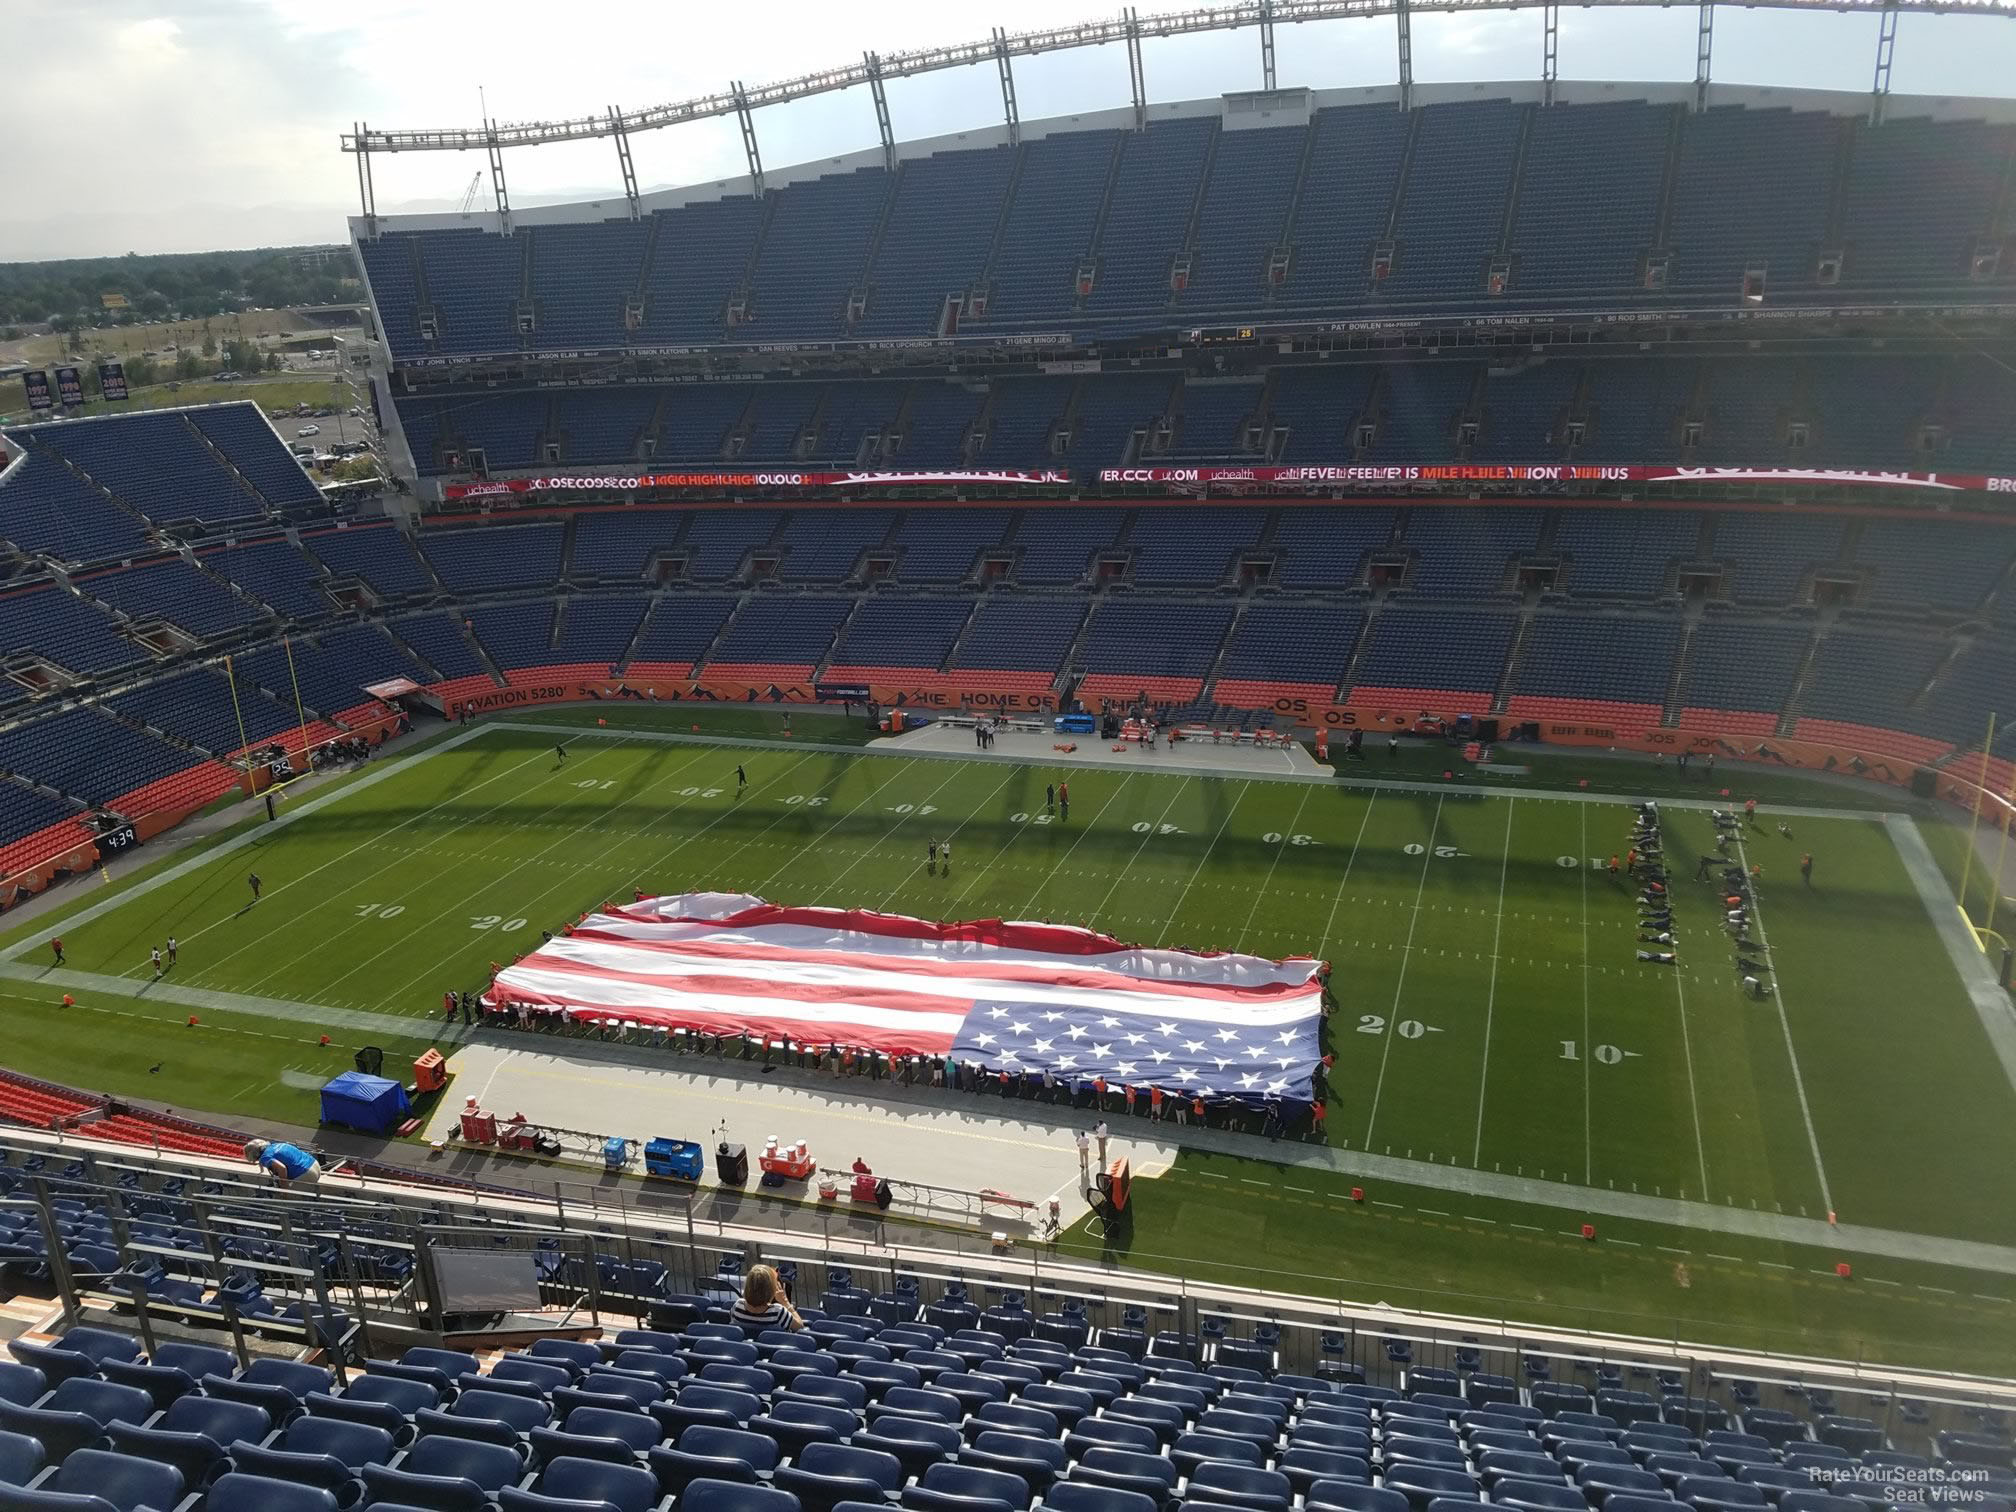 section 531, row 16 seat view  - empower field (at mile high)